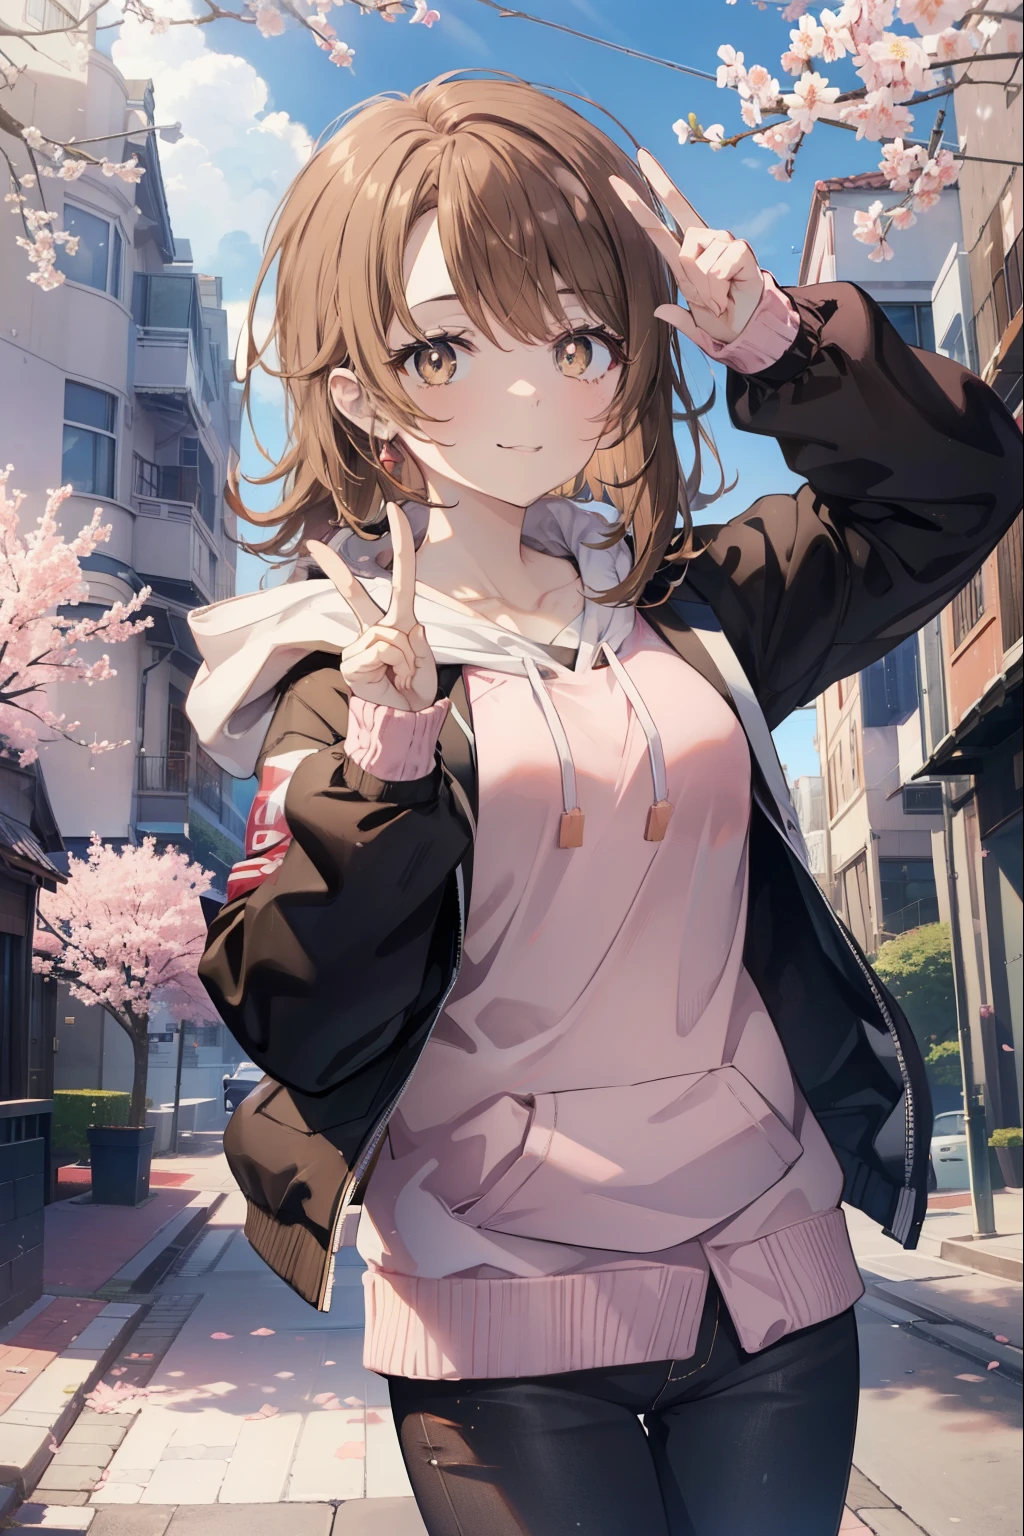 irohaisshiki, iroha isshiki, long hair, brown hair, (brown eyes:1.5), happy smile, smile, open your mouth,Put your hand over your mouth and make a peace sign, 1 girl,towards the camera,pink hoodie,short denim pants,black tights,short boots,independent&#39;with your back to the wall、The cherry blossoms have bloomed,Cherry blossoms are scattered,
break indoors, Cherry blossom tree-lined path,
break looking at viewer,Upper body,
break (masterpiece:1.2), highest quality, High resolution, unity 8k wallpaper, (shape:0.8), (fine and beautiful eyes:1.6), highly detailed face, perfect lighting, Very detailed CG, (perfect hands, perfect anatomy),